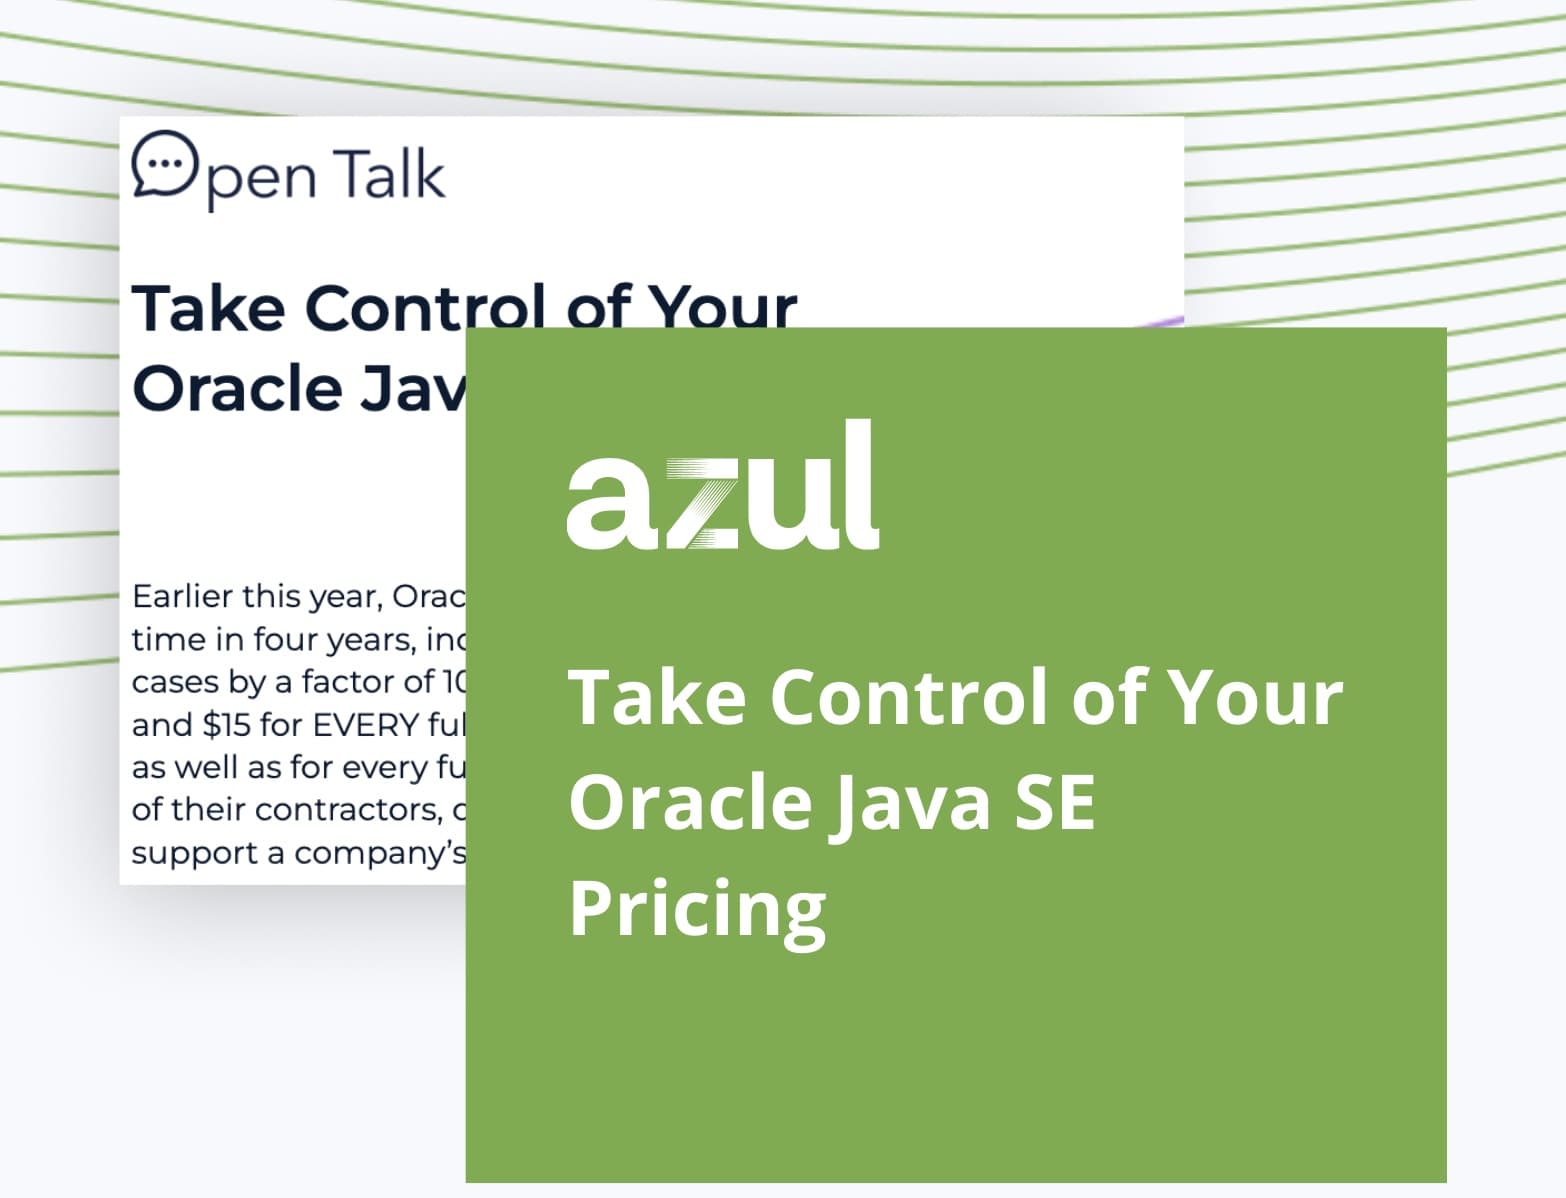 Take Control of Your Oracle Java SE Pricing